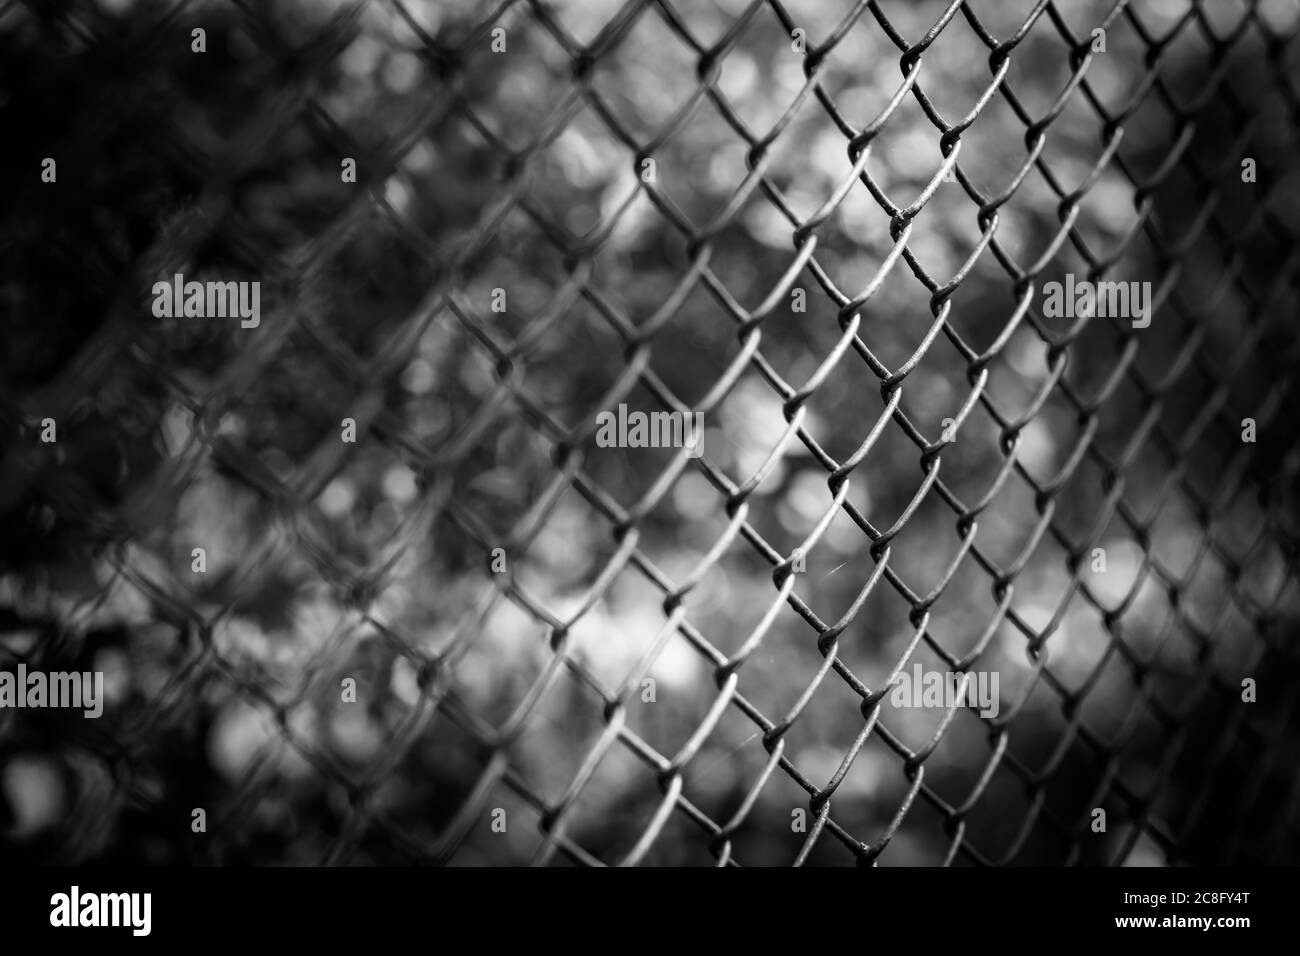 Chicken wire fence with short depth of field. Fence with metal grid in perspective Stock Photo